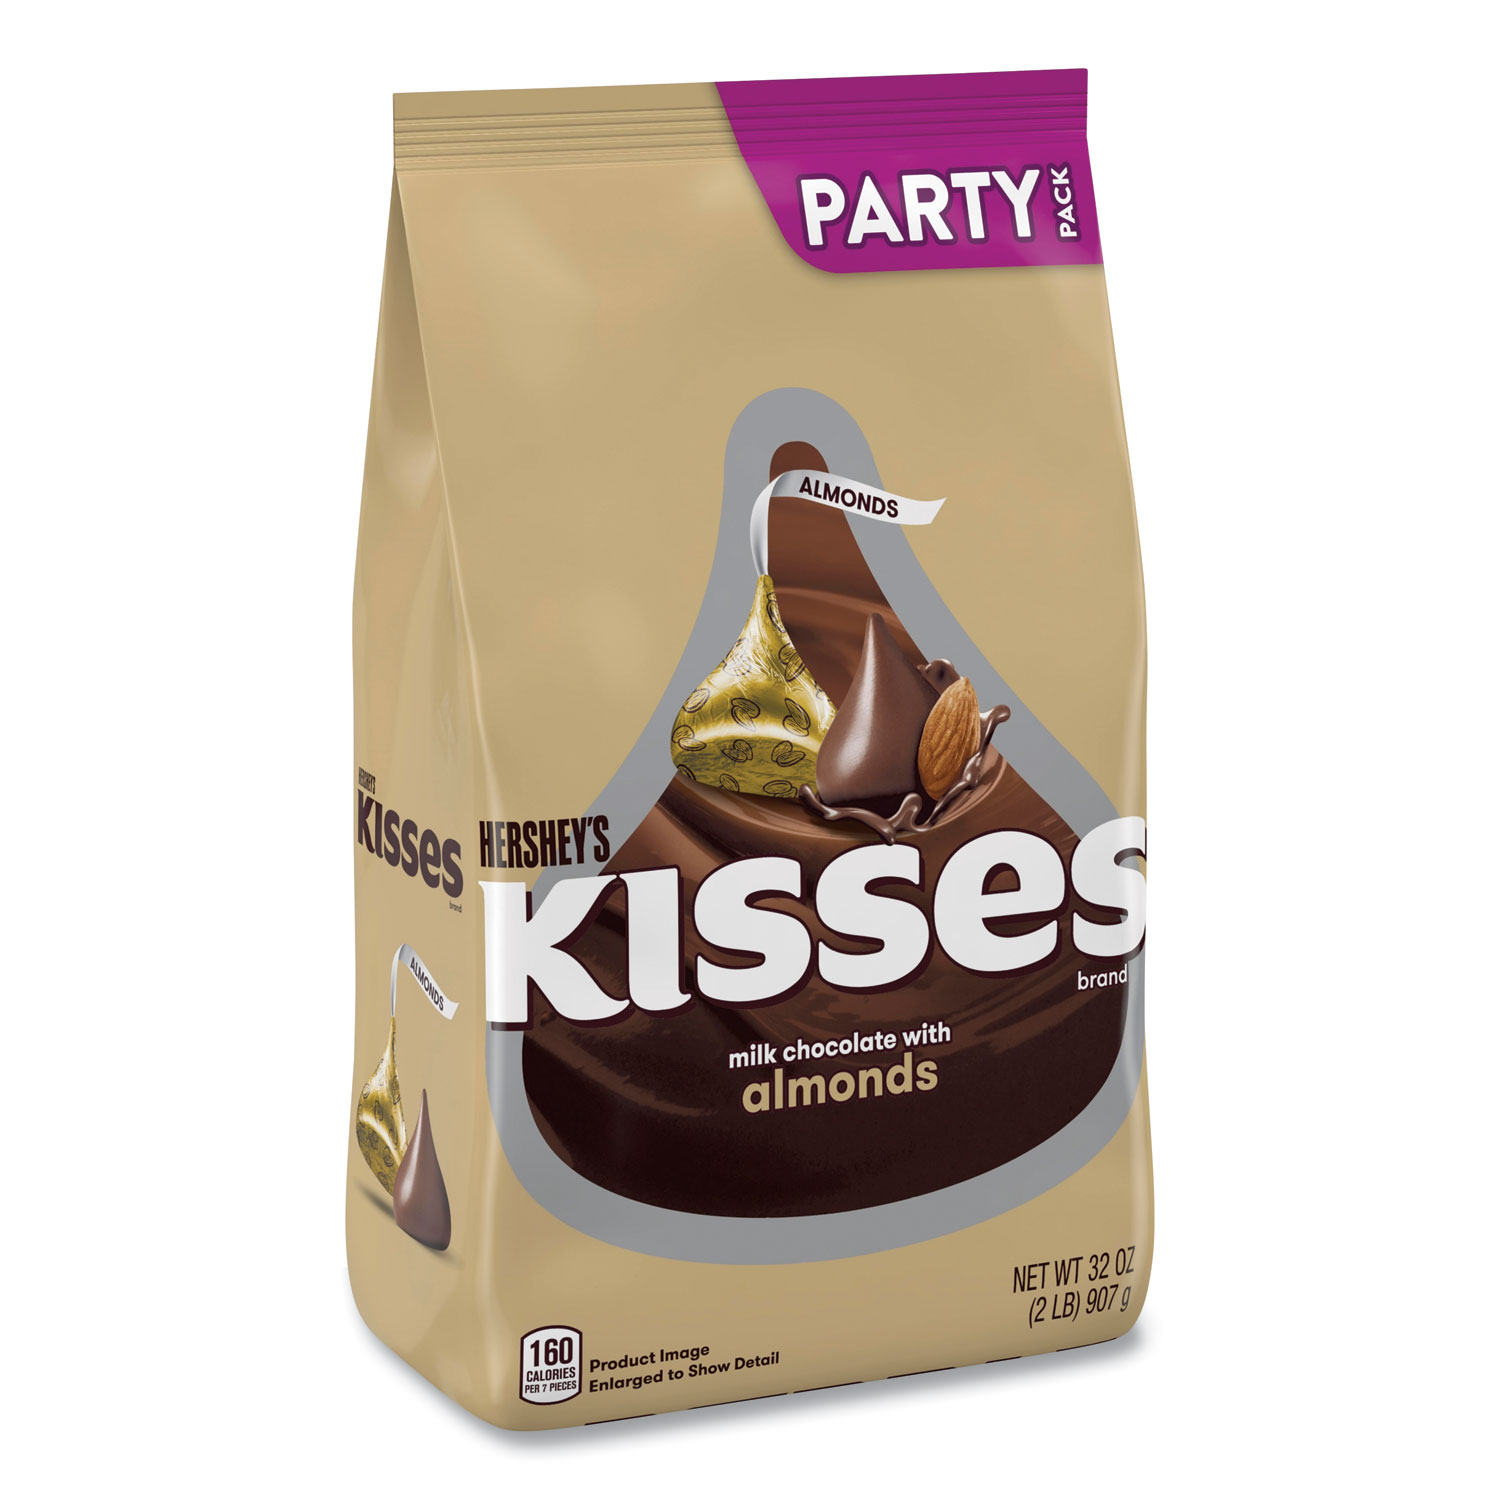  Hershey's 13479 KISSES Milk Chocolate with Almonds, Party Pack, 32 oz Bag, Free Delivery in 1-4 Business Days (GRR24600418) 